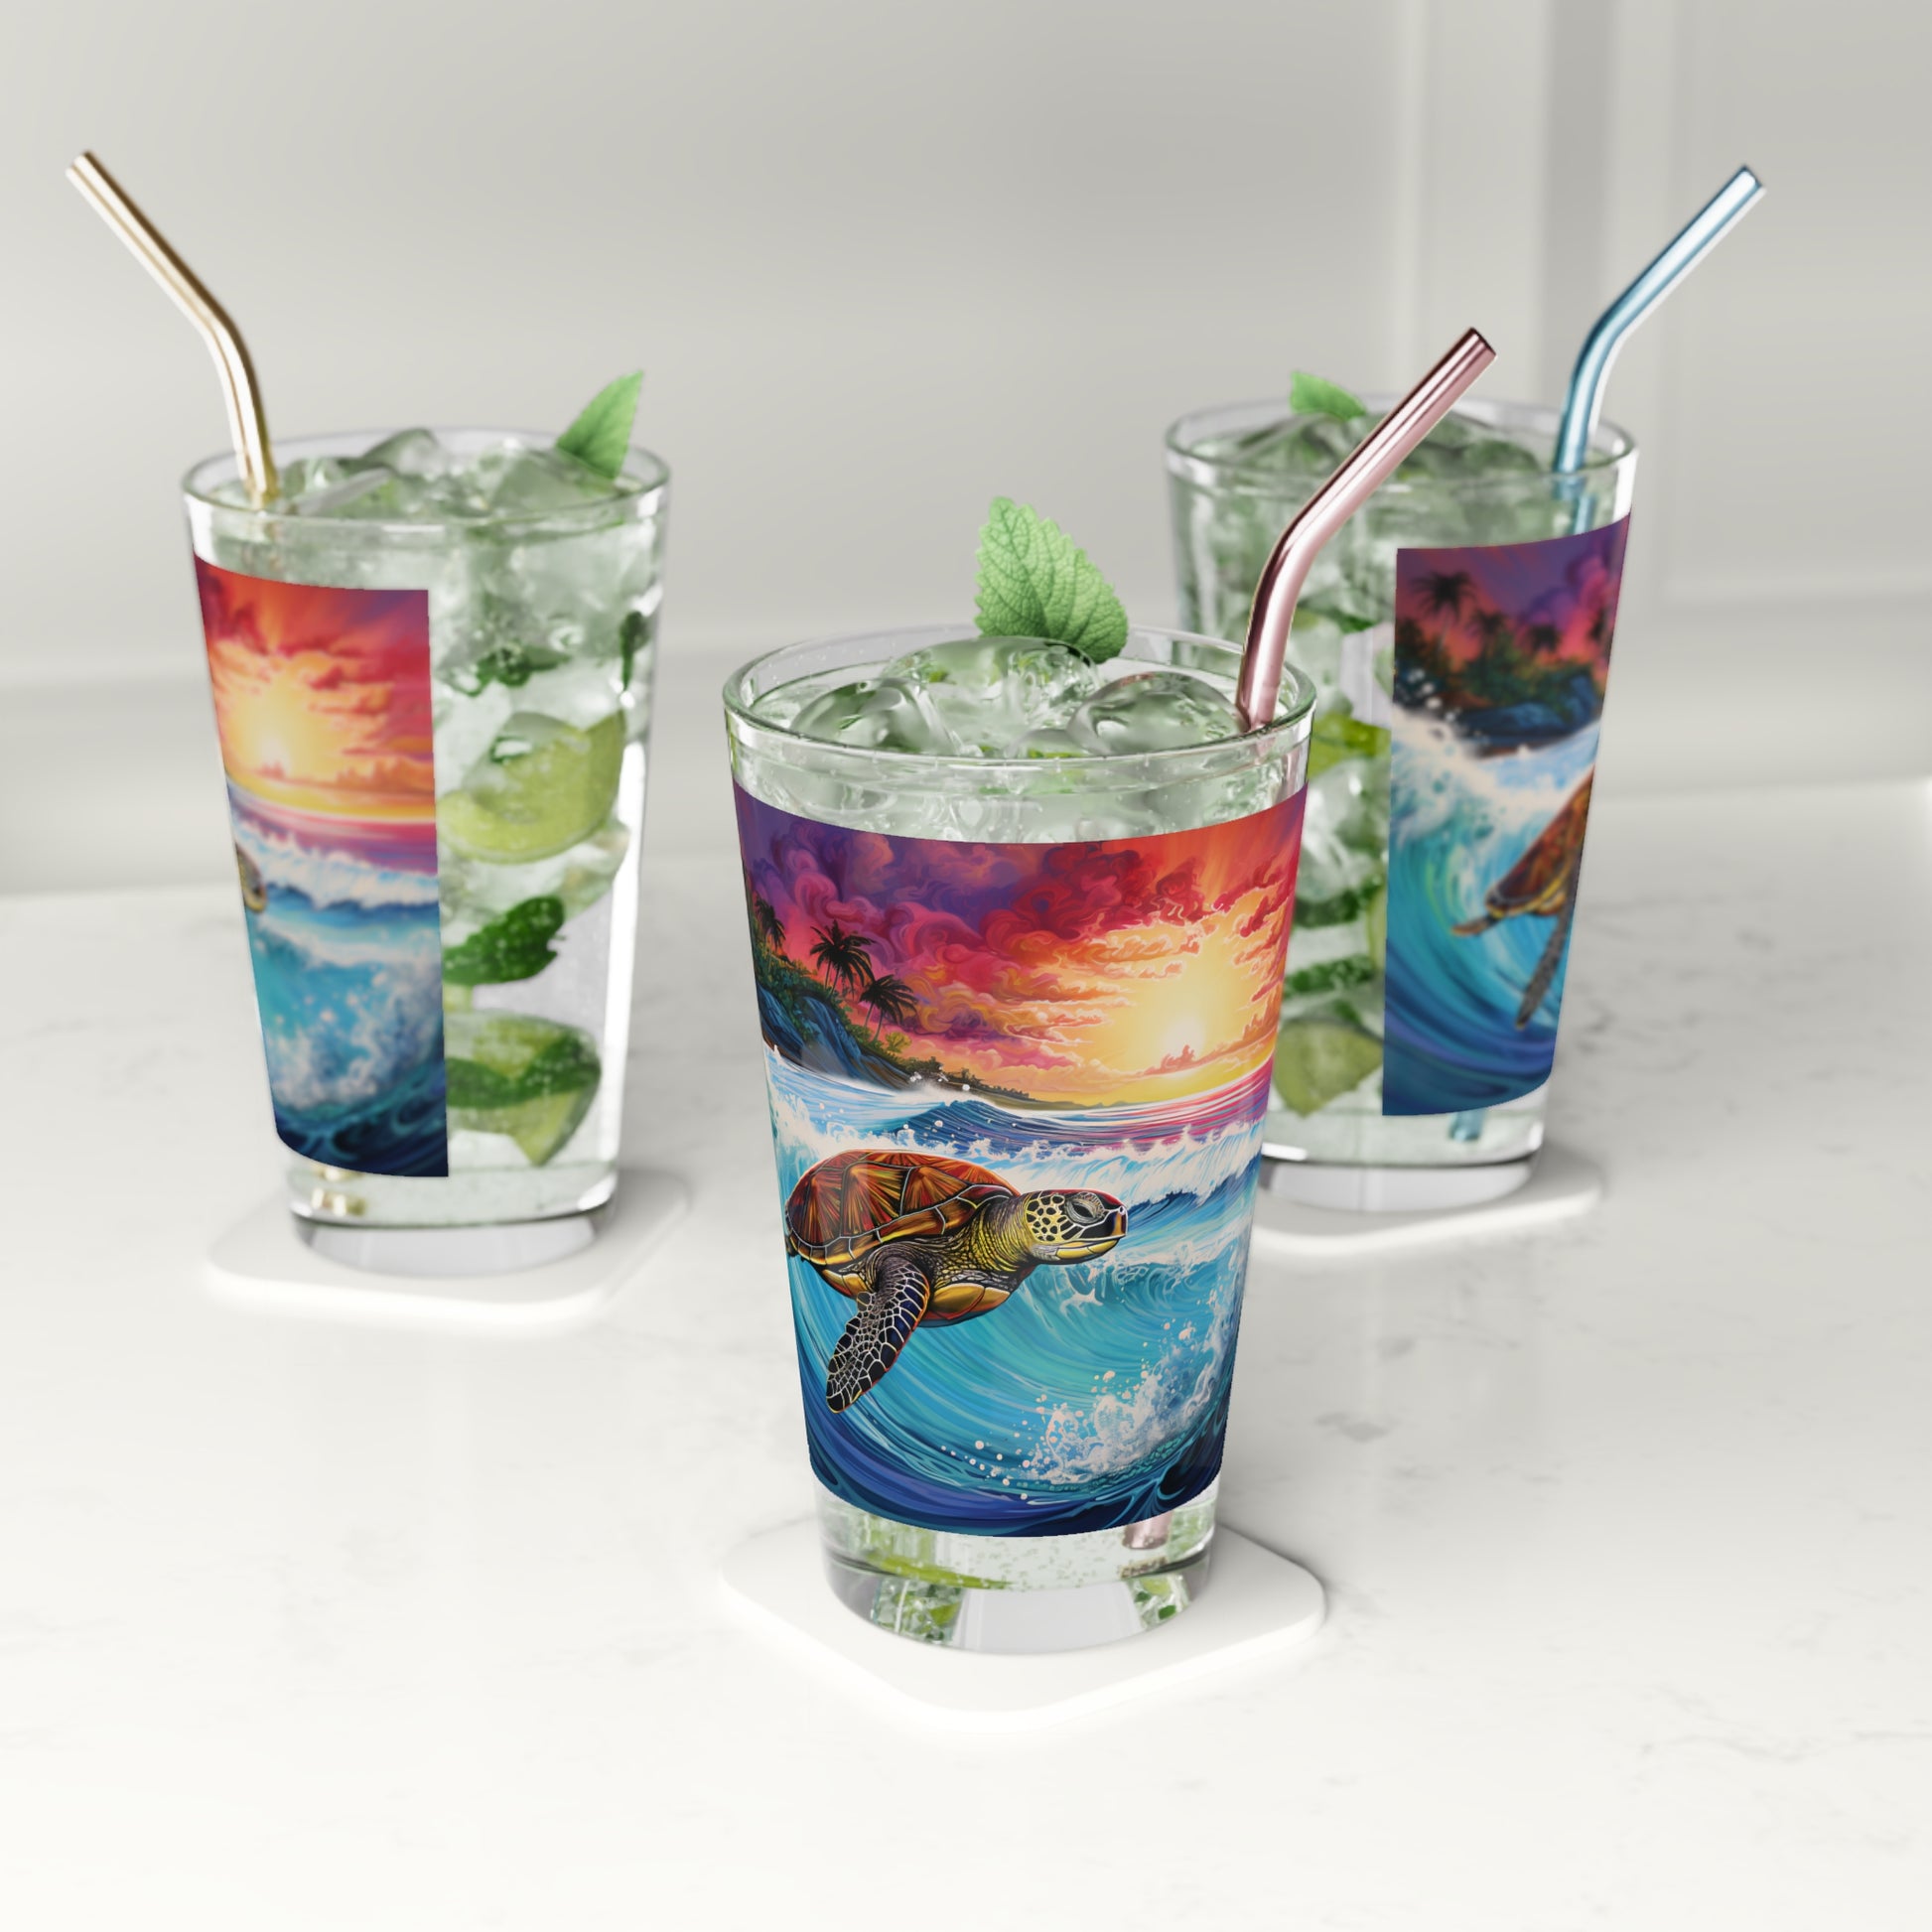 Experience the serenity of the ocean with our Turtle Surfing Color Wave Pint Glass. Waves Design #028 adorns this 16oz glass, bringing the beauty of sea turtles and vibrant waves to your fingertips. A Stashbox exclusive for nature enthusiasts.